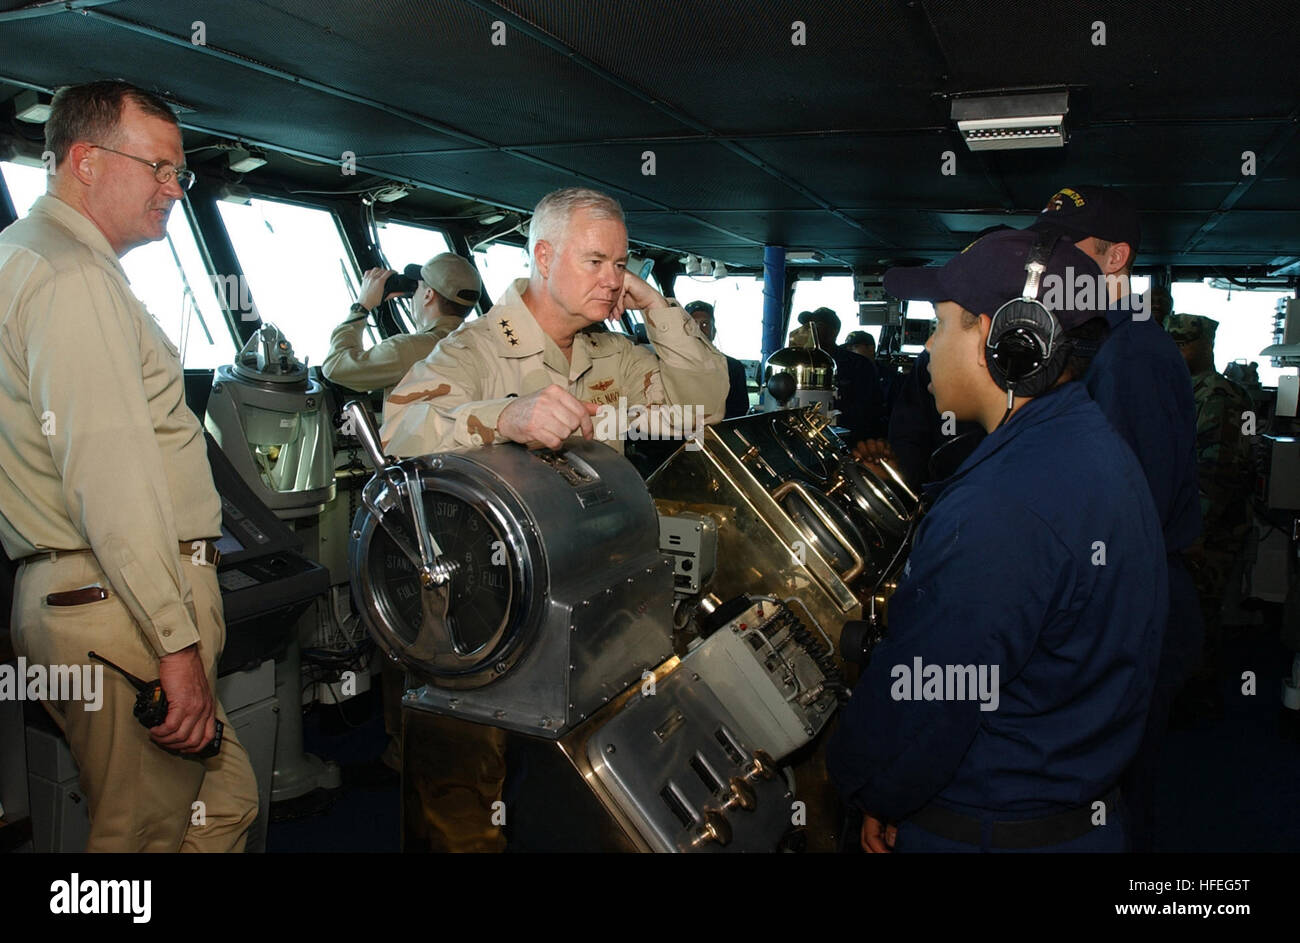 030301-N-0120R-002 Arabian Gulf (Mar. 1, 2003) -- Vice Adm. Timothy Keating, Commander, U.S. Naval Force Central Command, tours the bridge of the aircraft carrier USS Kitty Hawk (CV 63) while meeting with Sailors aboard ship. Kitty Hawk and her embarked Carrier Air Wing Five (CVW-5) are conducting missions in support Operation Southern Watch and Enduring Freedom. Kitty Hawk and its embarked Carrier Air Wing Five (CVW-5) is the worldÕs only permanently forward-deployed aircraft carrier and operates out of Yokosuka, Japan.  U.S. Navy photo by PhotographerÕs Mate 3rd Class William H. Ramsey.  (RE Stock Photo